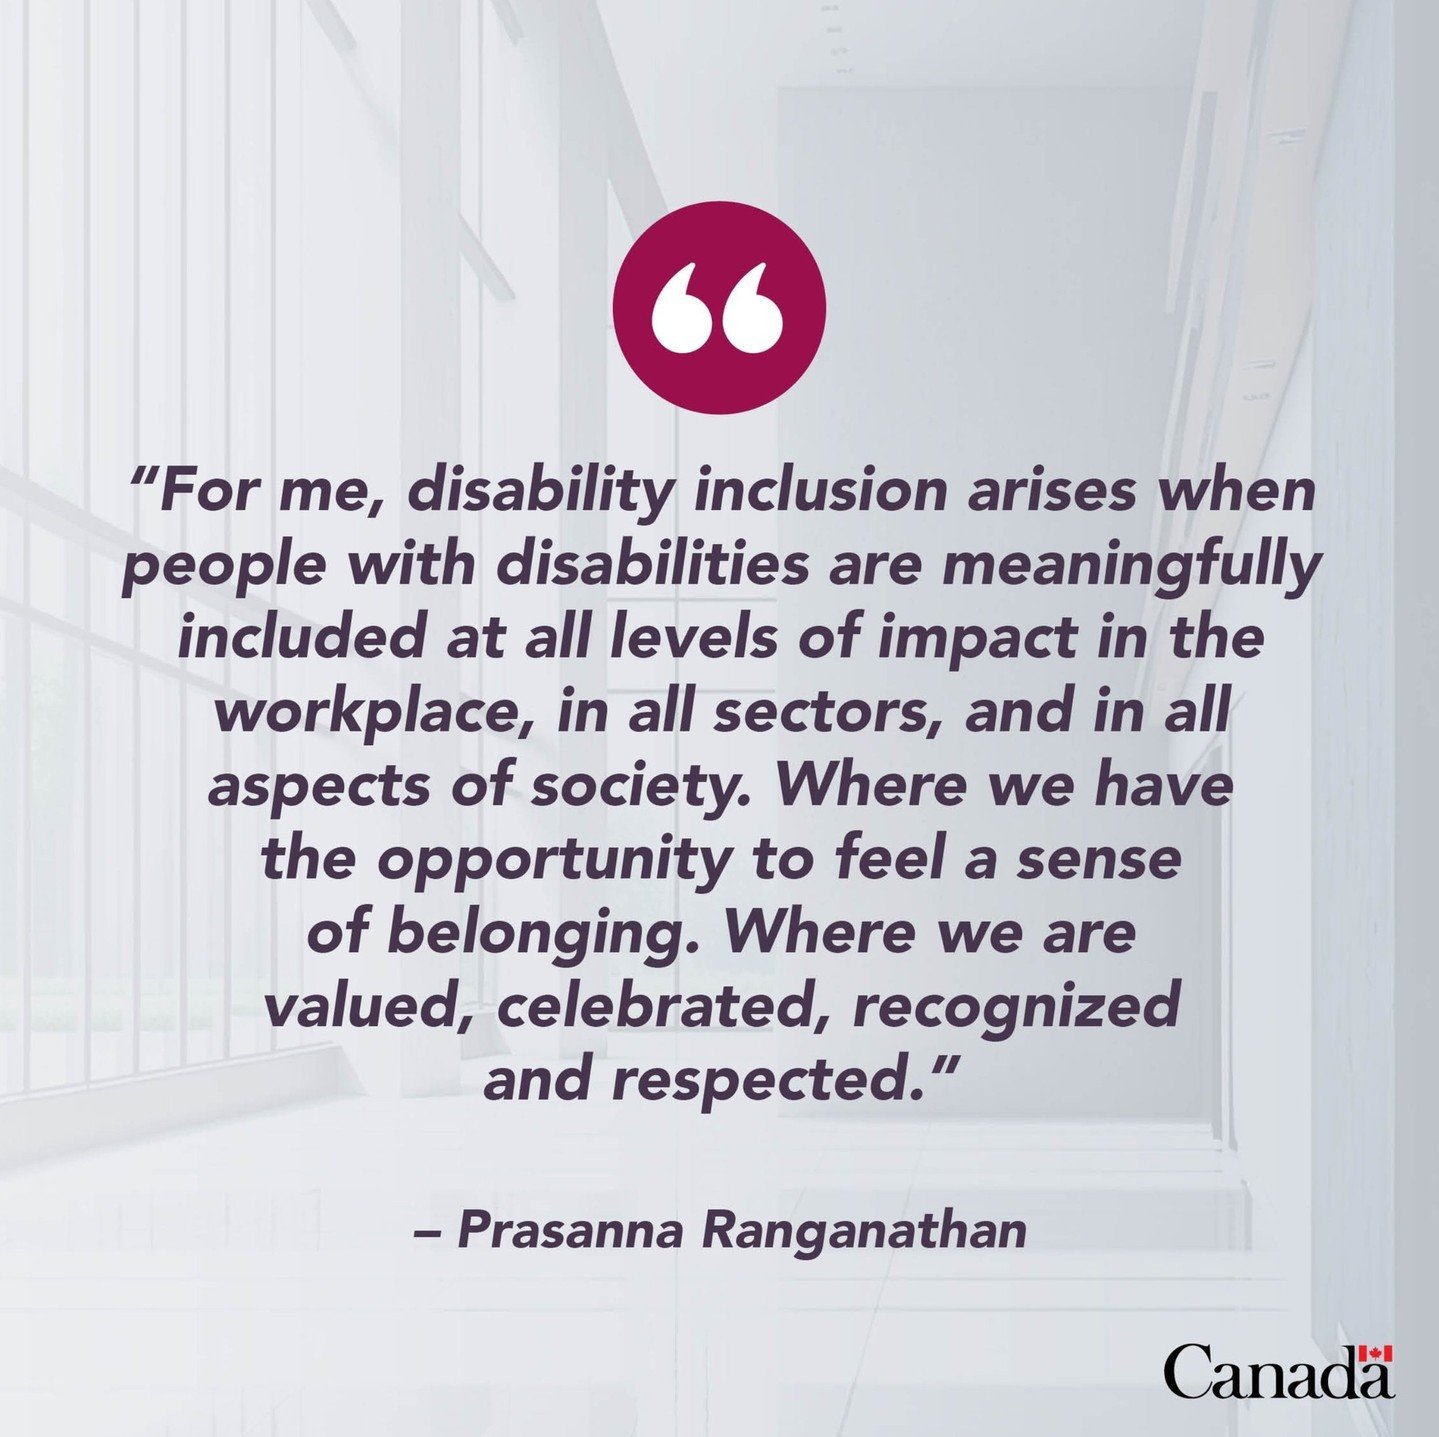 Mark your calendars! 📅 On May 23rd, don't miss the third annual Canadian Congress on Disability Inclusion (CCDI)!

This virtual event brings together persons with disabilities, disability organizations, public and private organizations, academics, i